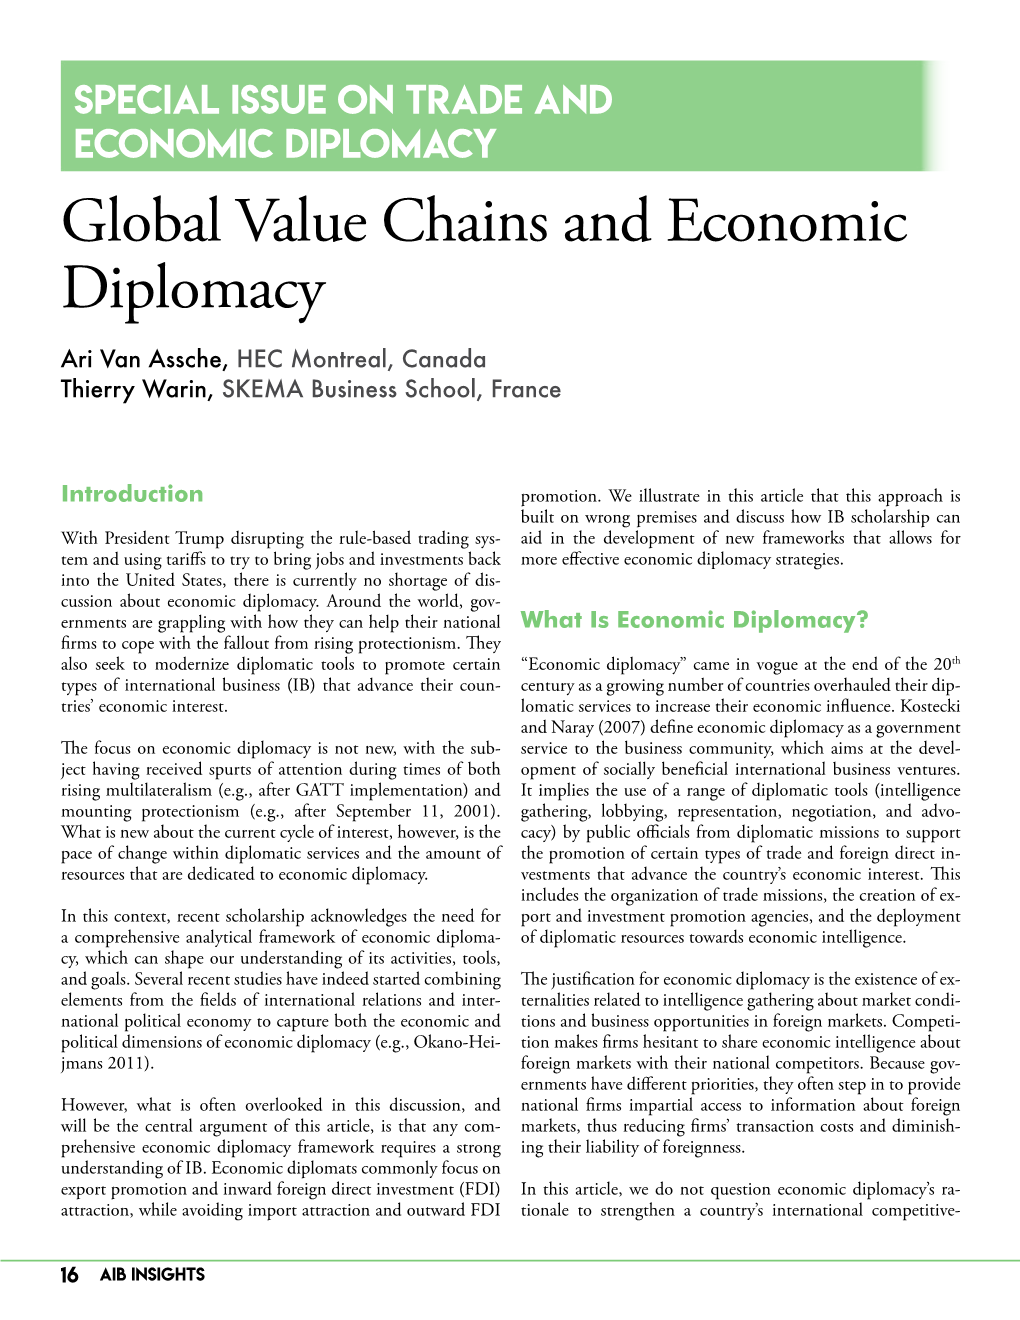 Global Value Chains and Economic Diplomacy Ari Van Assche, HEC Montreal, Canada Thierry Warin, SKEMA Business School, France